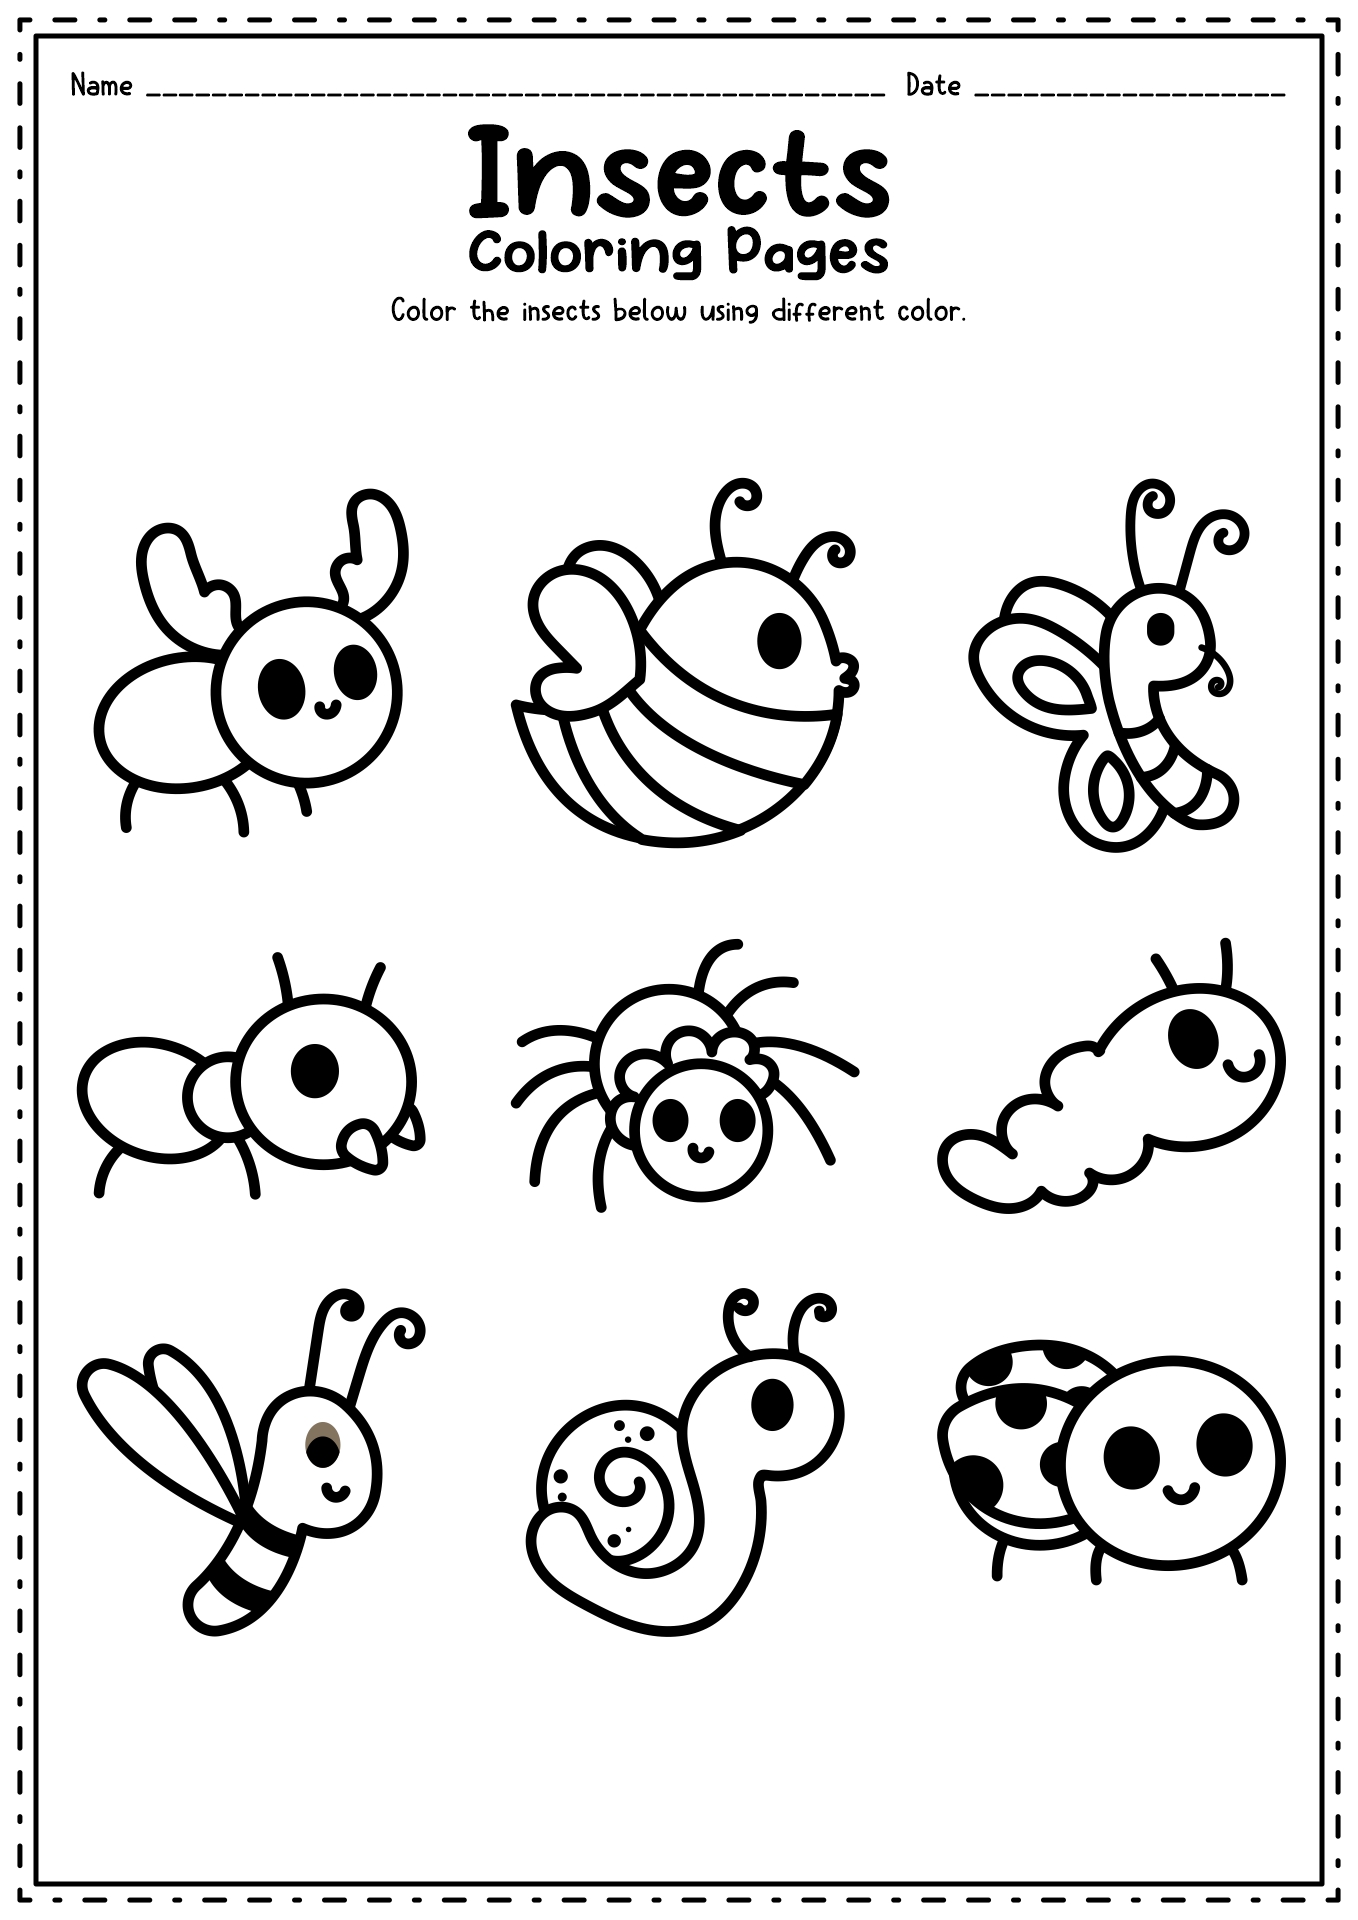 insect-sort-pdf-google-drive-insects-preschool-insect-activities-insects-kindergarten